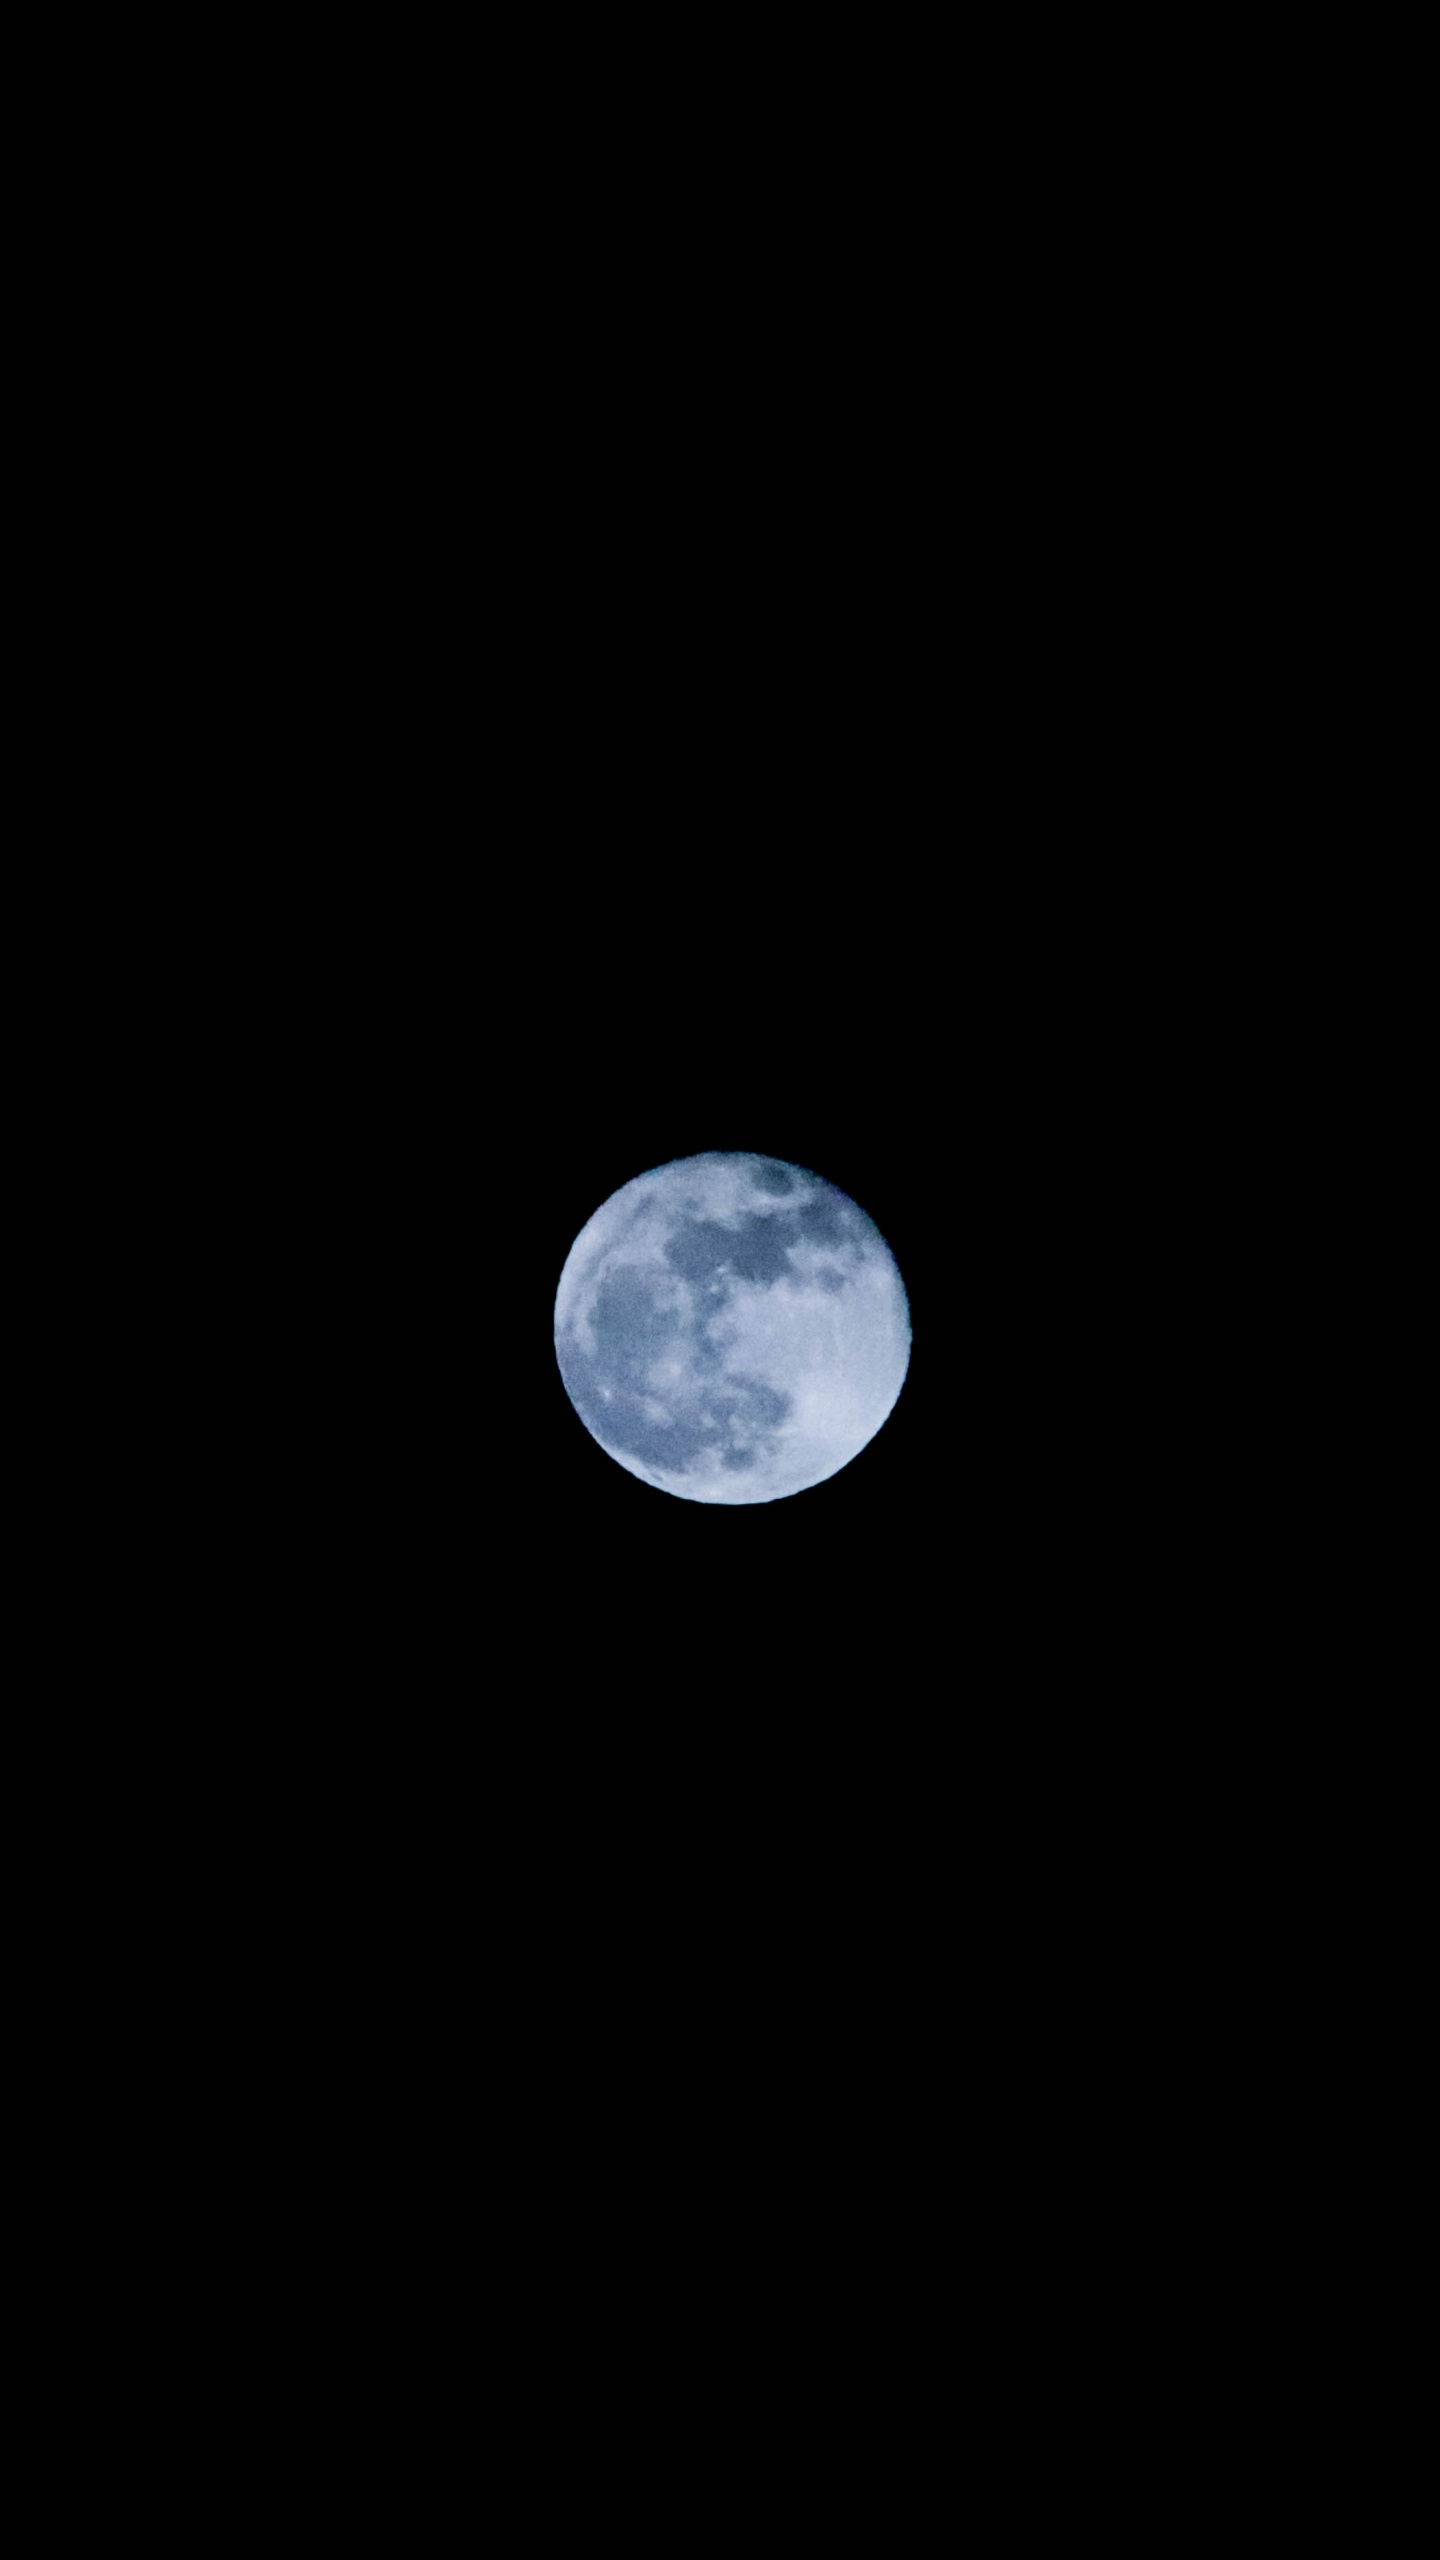 Full Moon in The Sky. Wallpaper in 1440x2560 Resolution